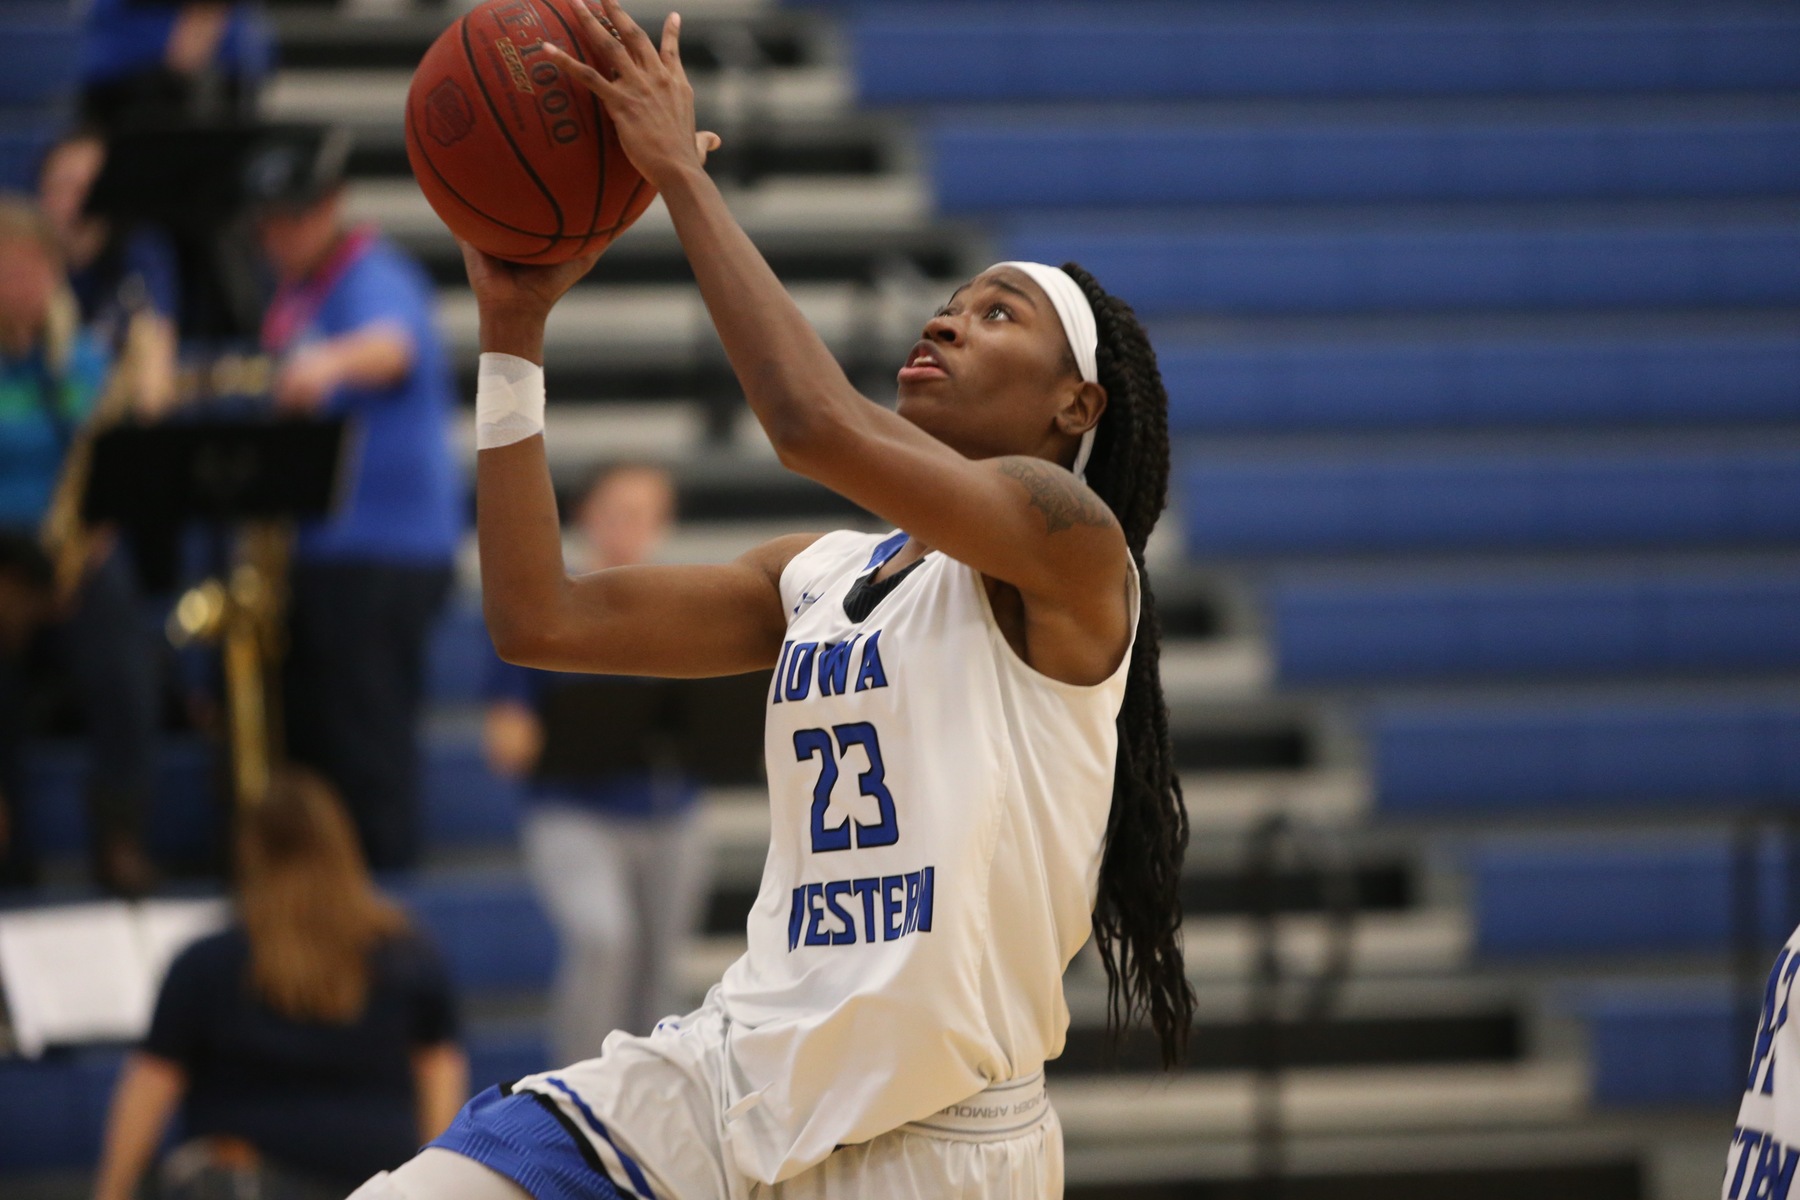 Sophomore forward Miya Bull lead IWCC in scoring tallying 13 points in the win over Northeast this past Saturday.